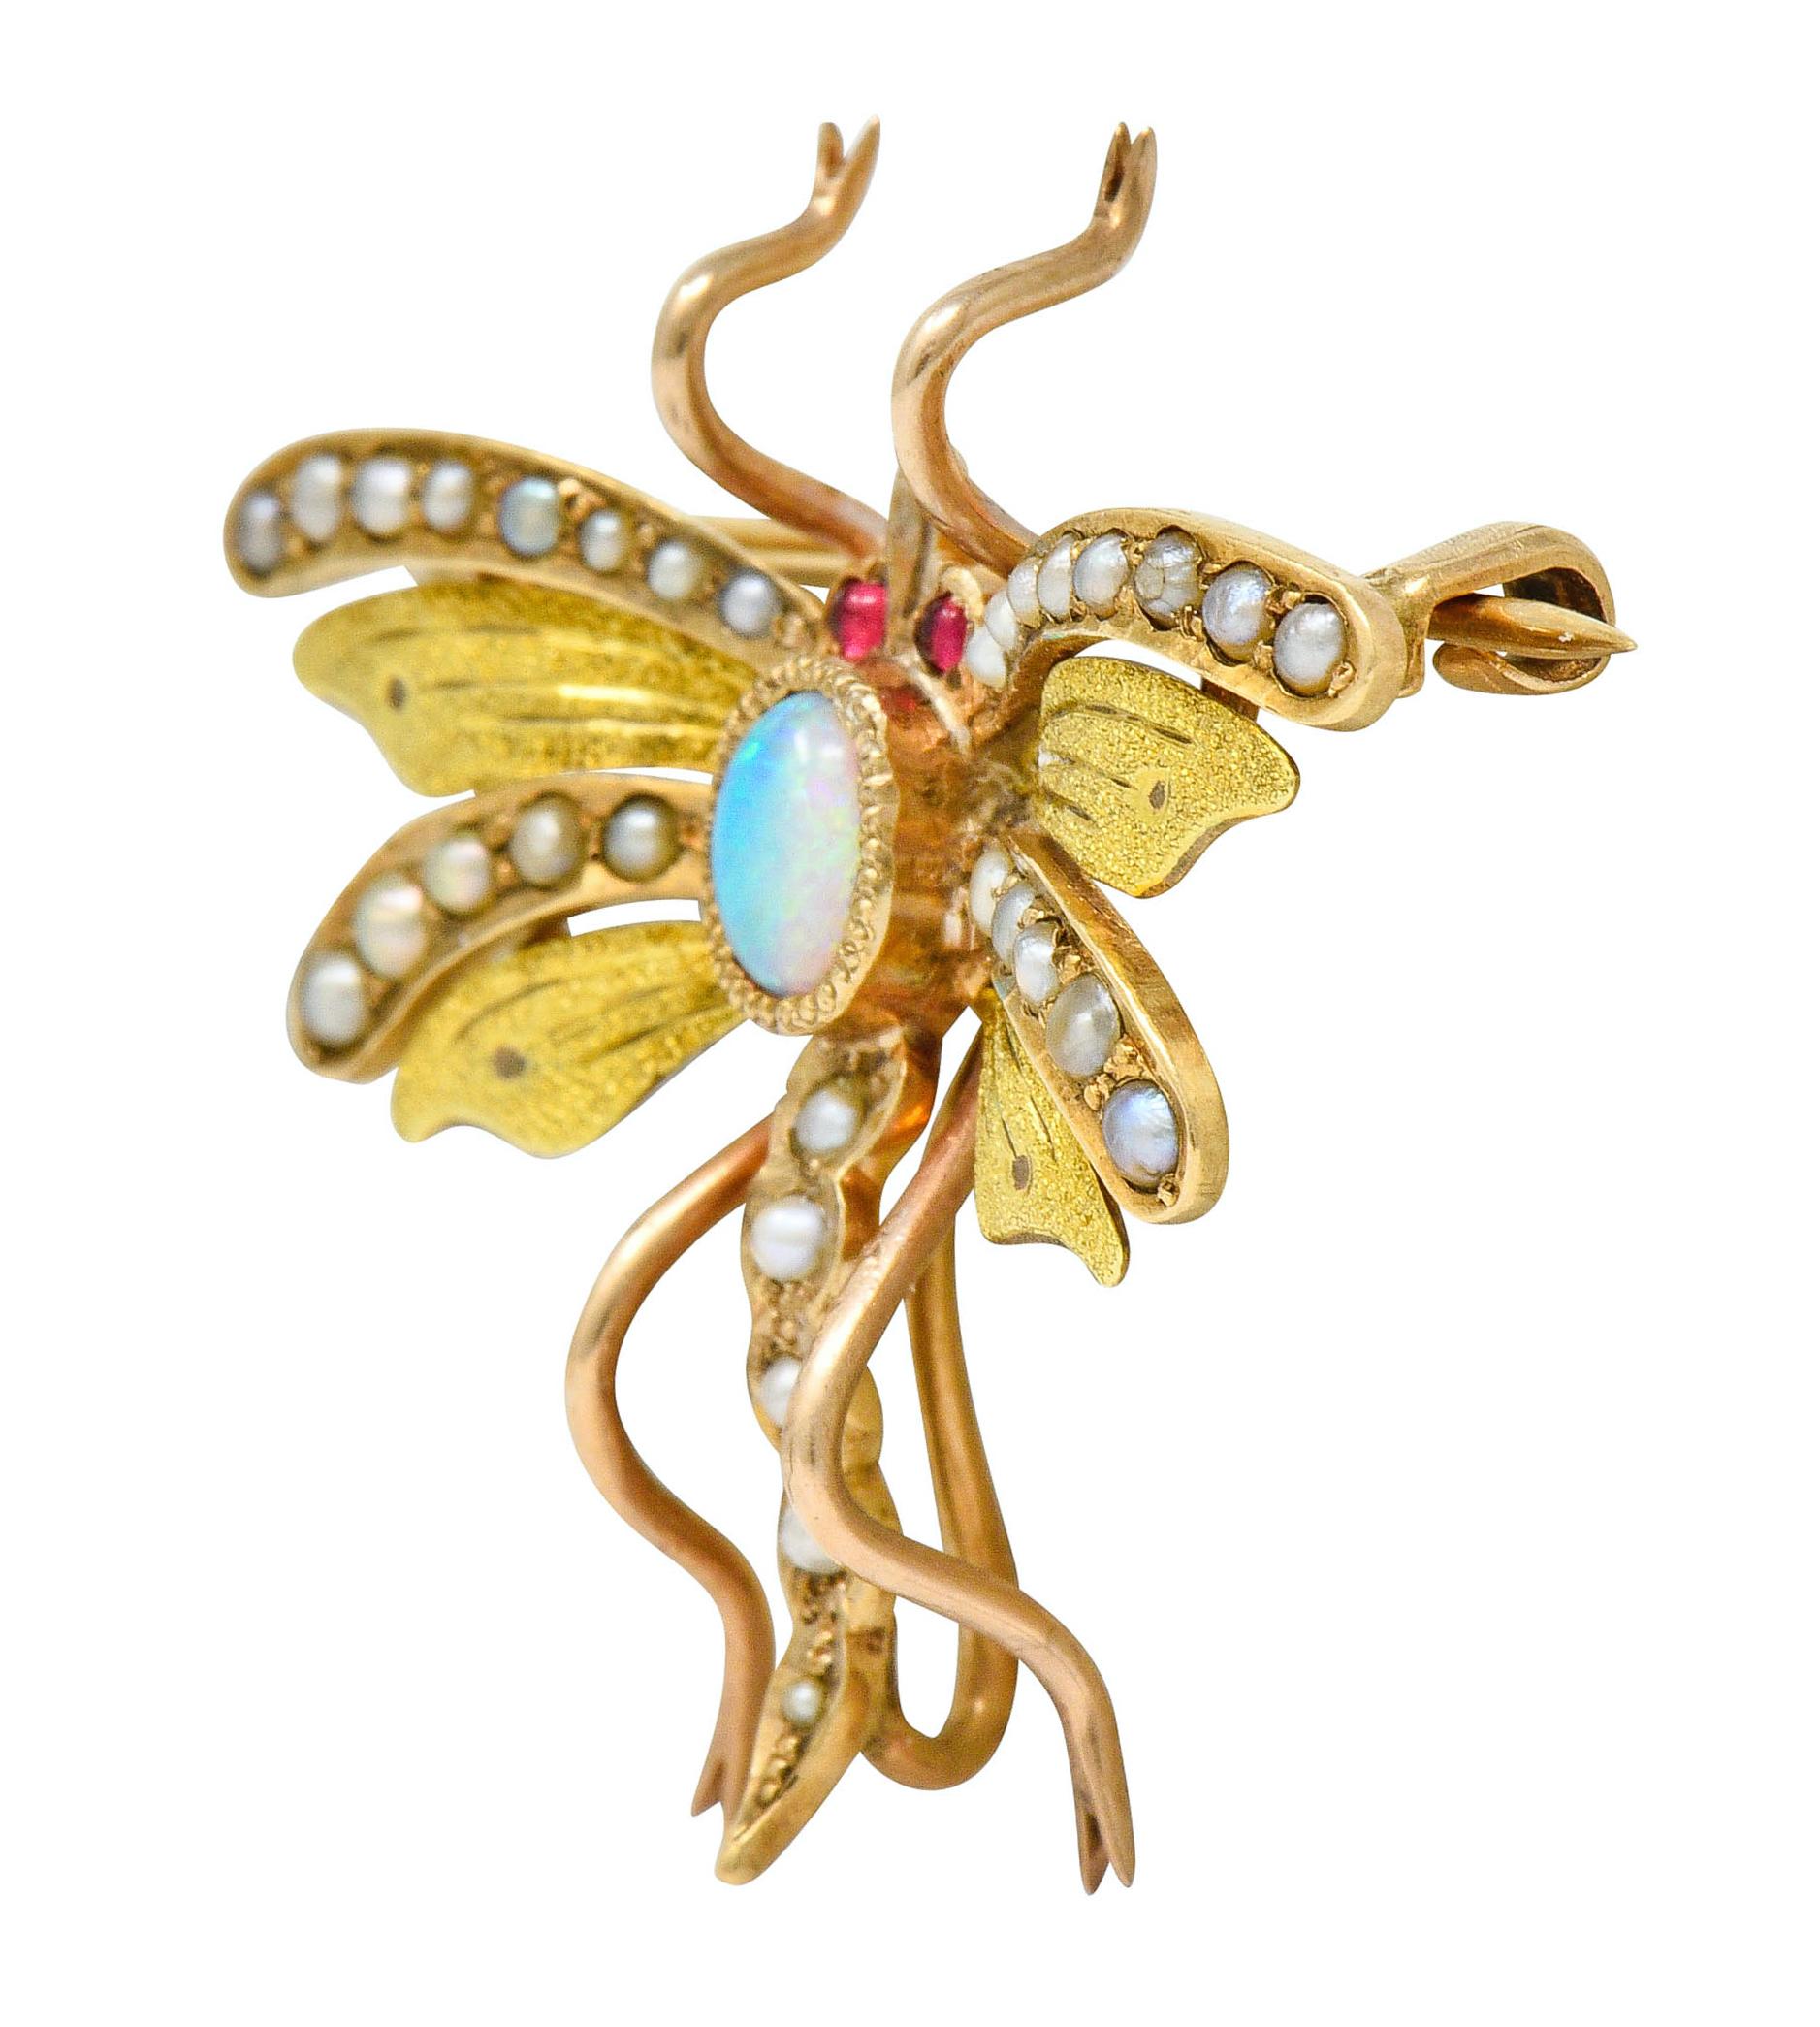 Pendant brooch designed as a stylized flying insect with fanciful wings that feature matte green gold detail

Thorax centers a bezel set opal cabochon measuring approximately 5.0 x 3.5 mm; white body color with strong green/blue